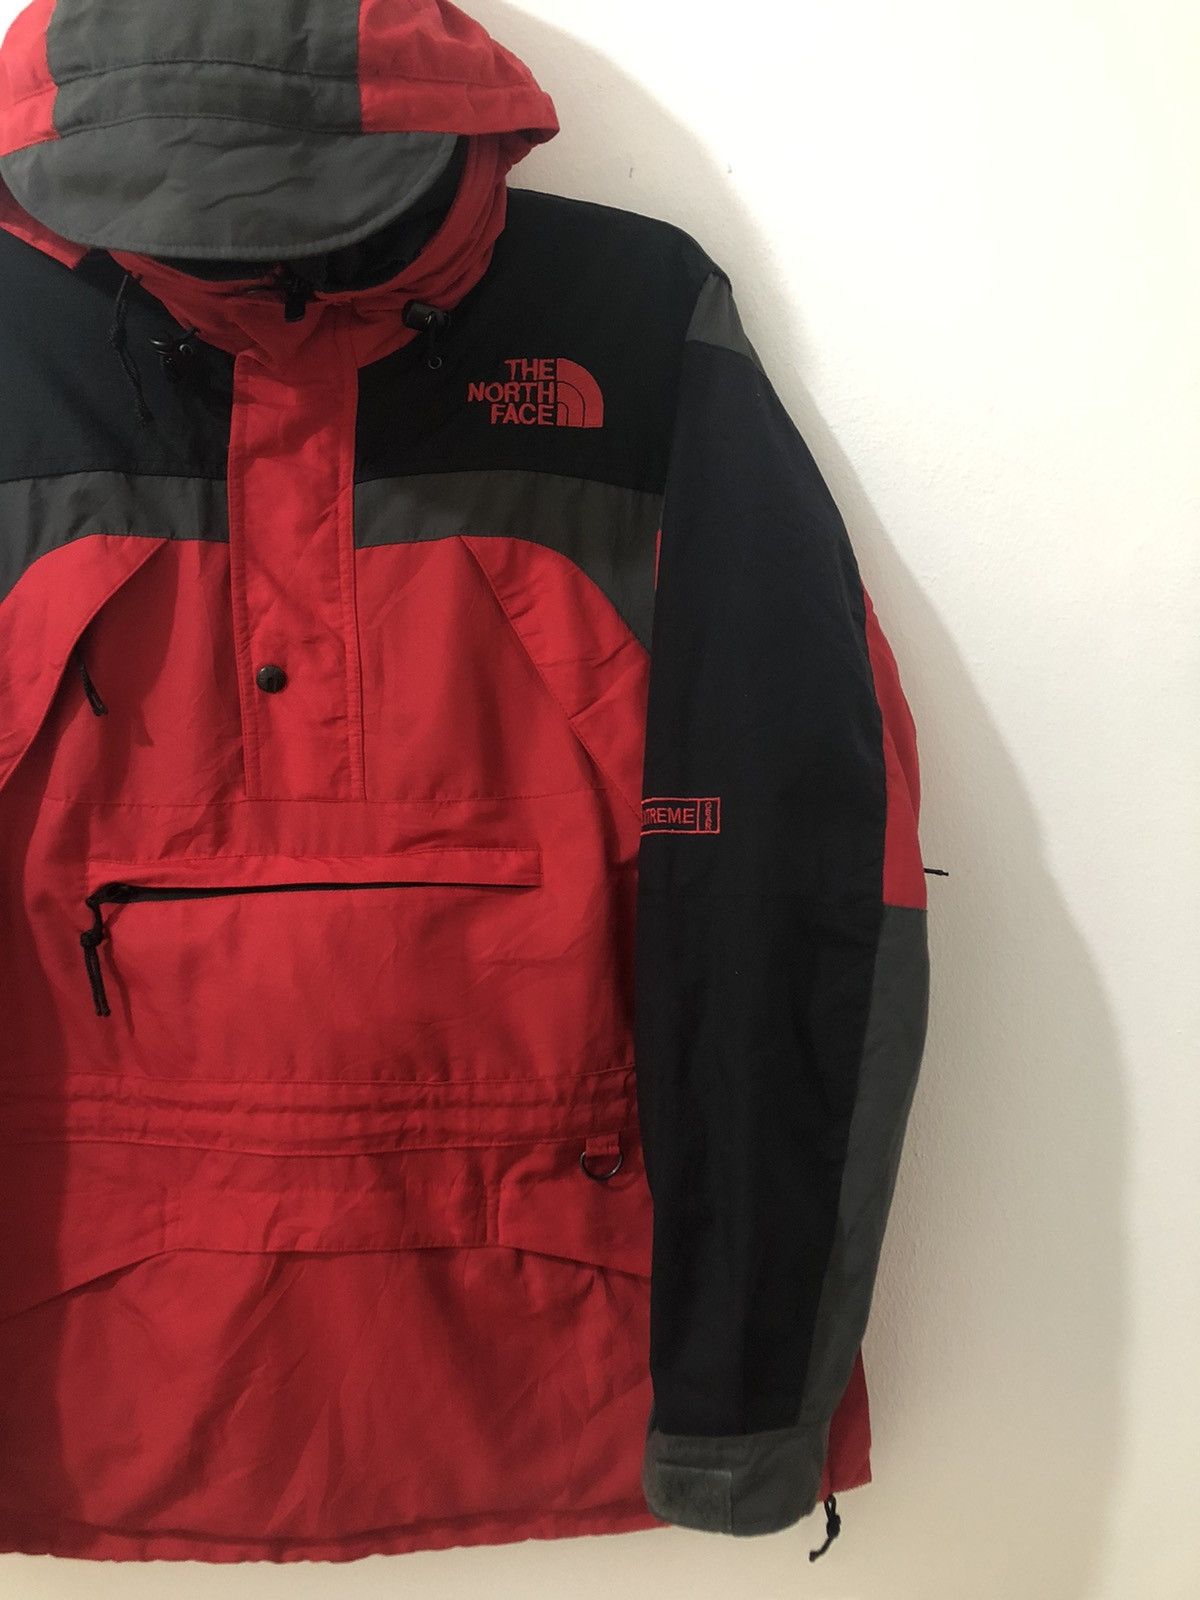 Rare 90s North Face Extreme Gear Pullover Jacket - 6